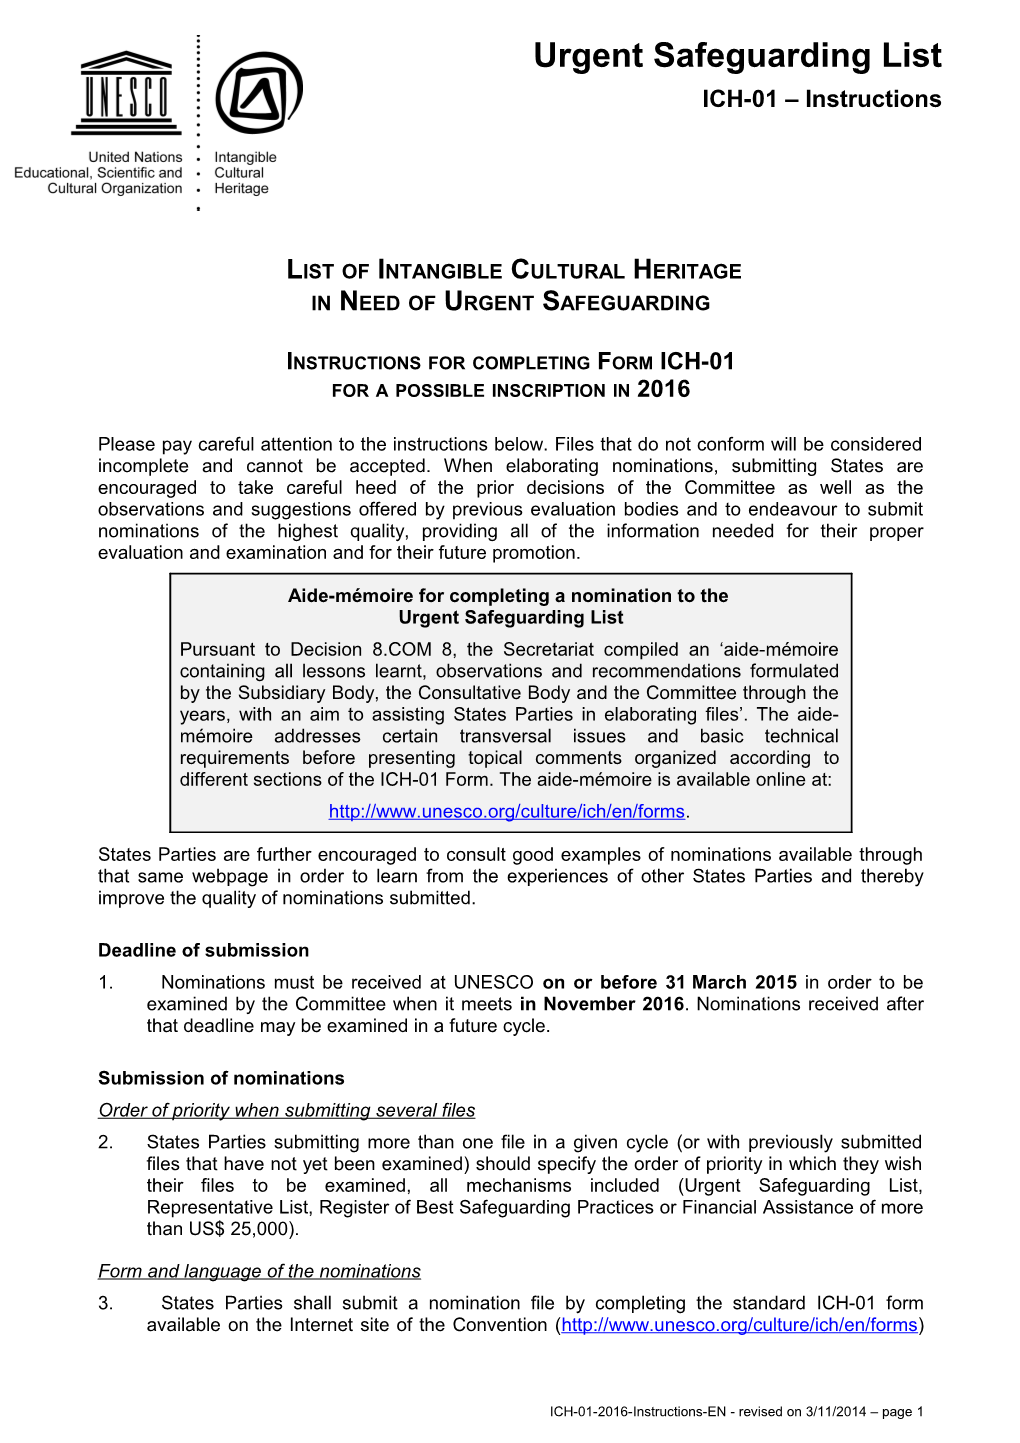 Instructions for Completing Form ICH-01 for a Possible Inscription in 2016